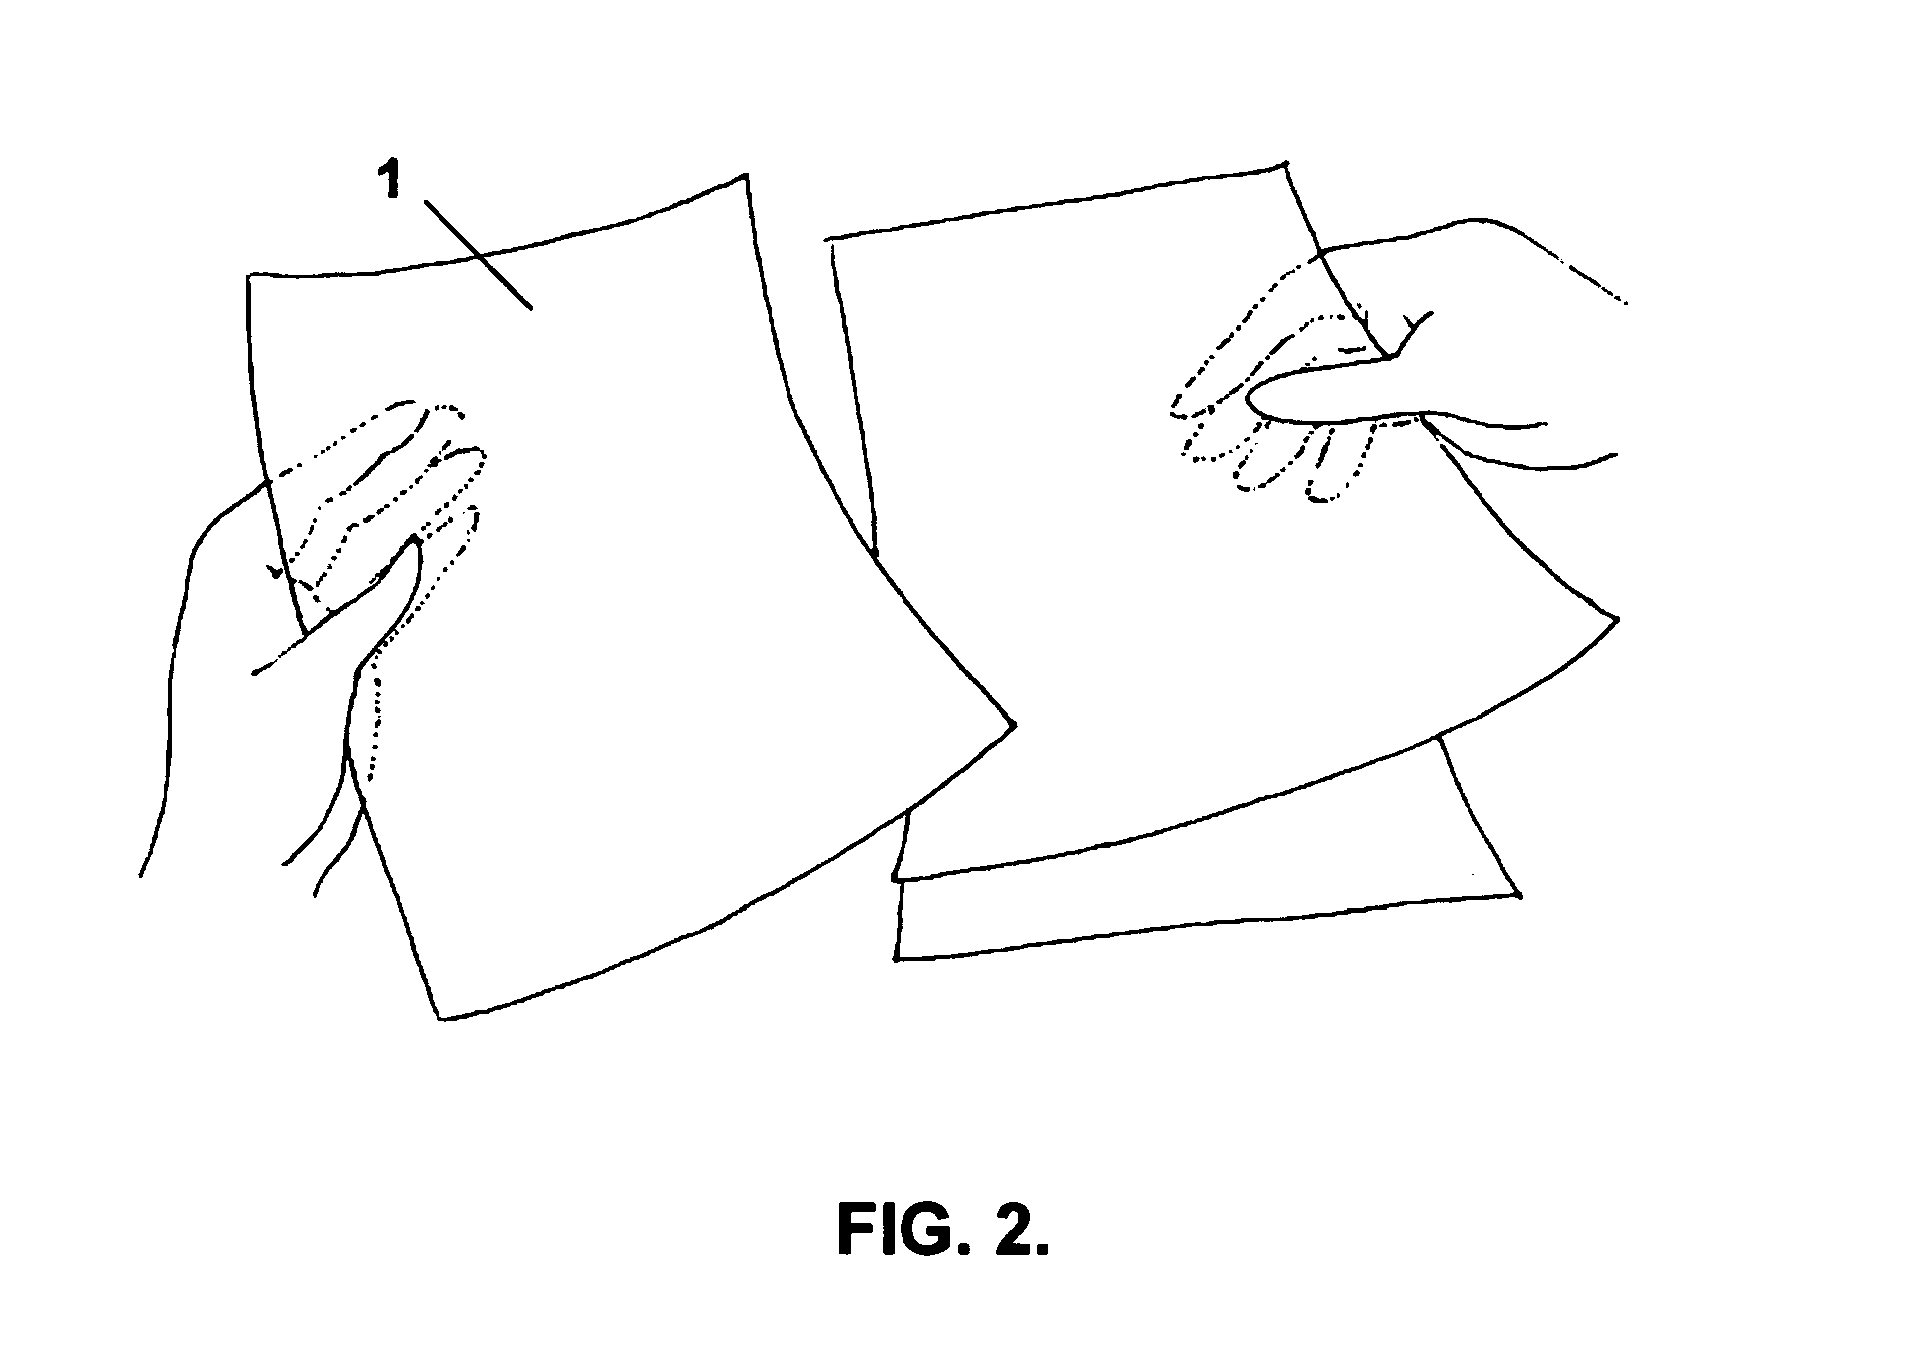 Interaction techniques for flexible displays